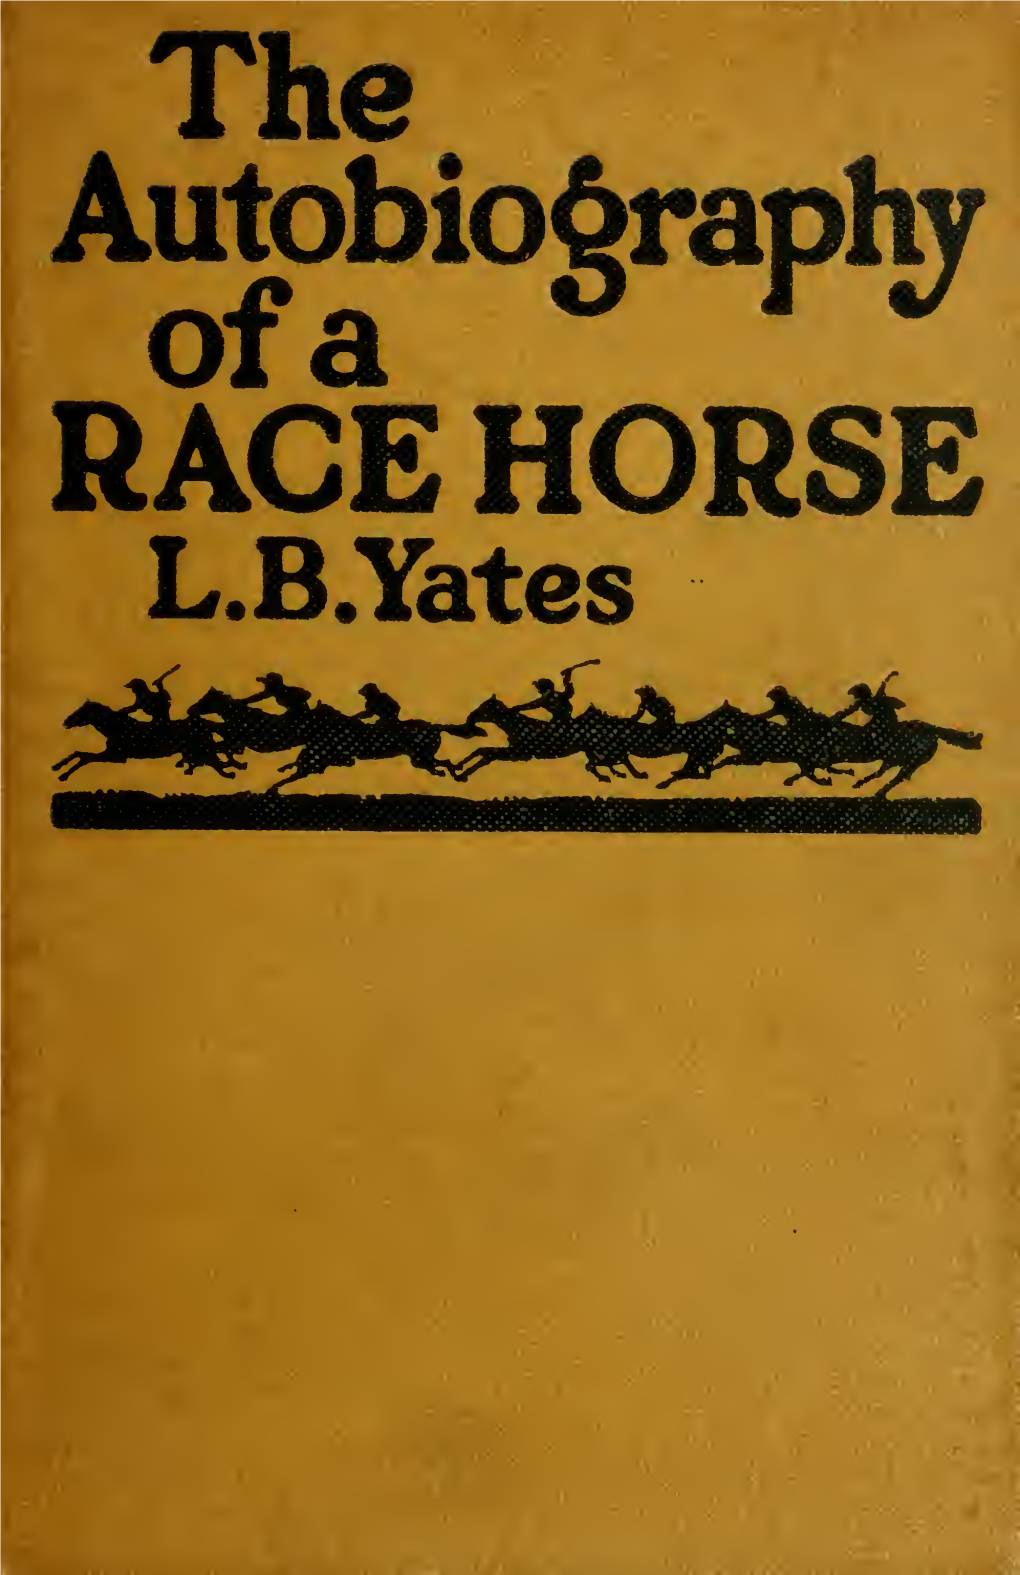 The Autobiography of a Race Horse